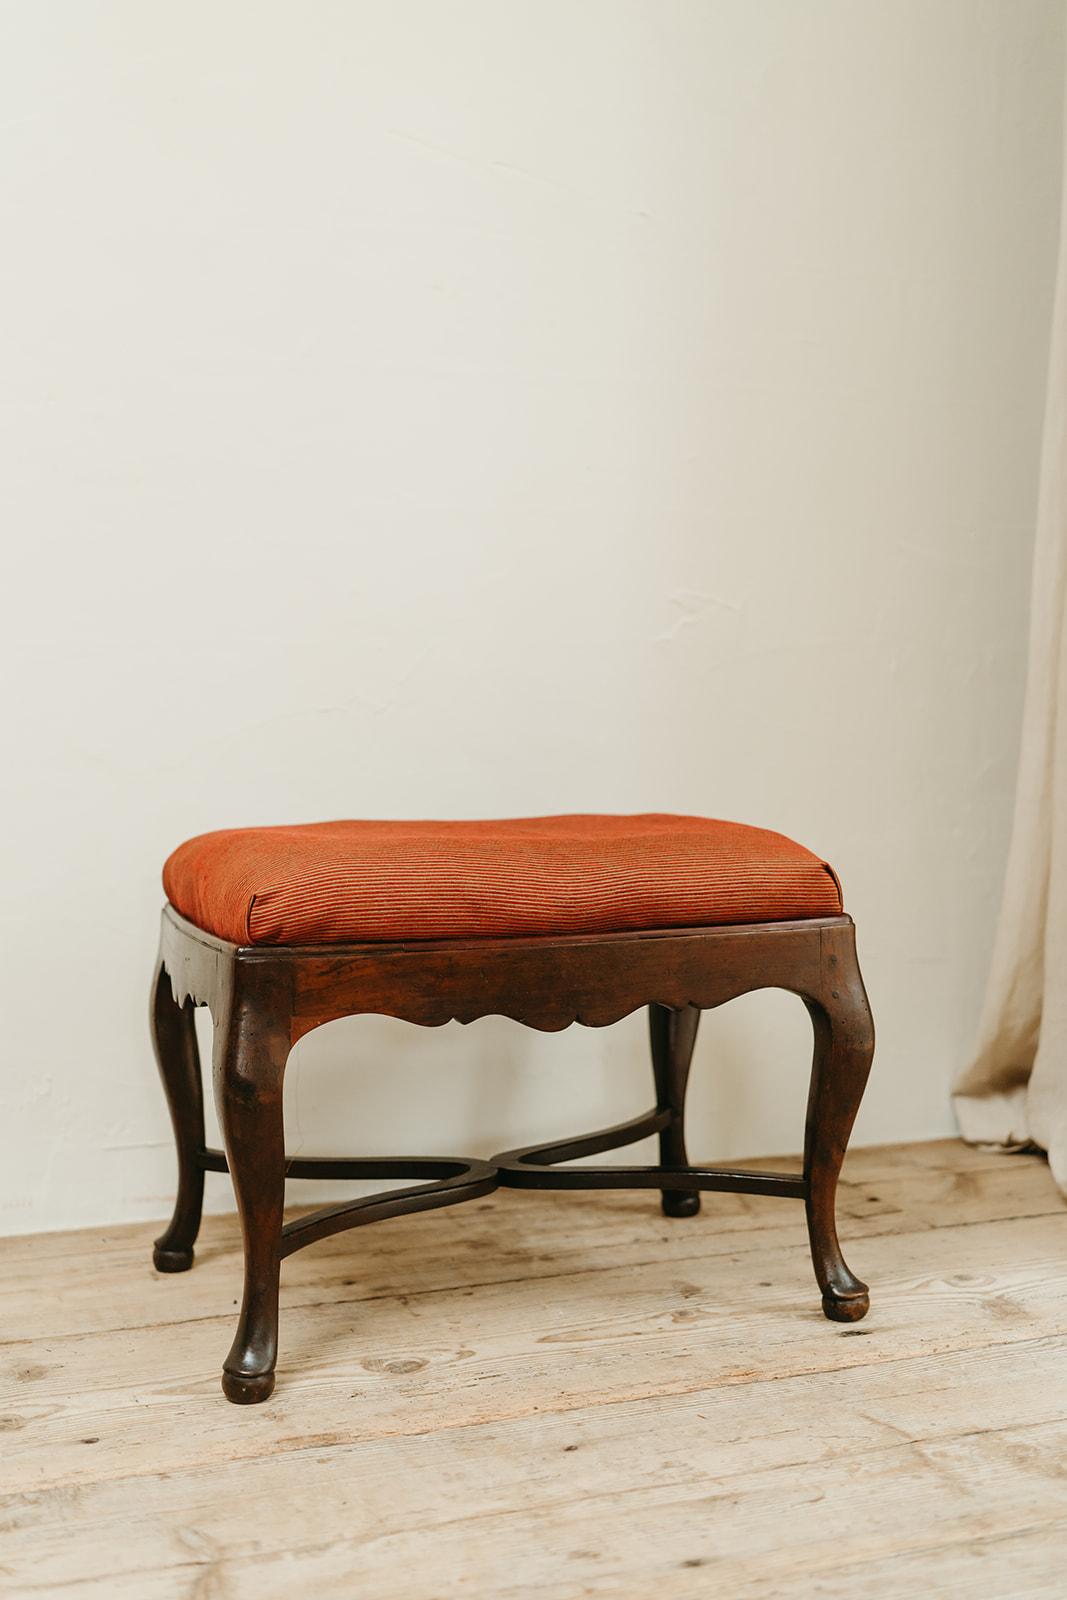 a very elegant mid 18th century English stool, lovely patina on the wood ... 